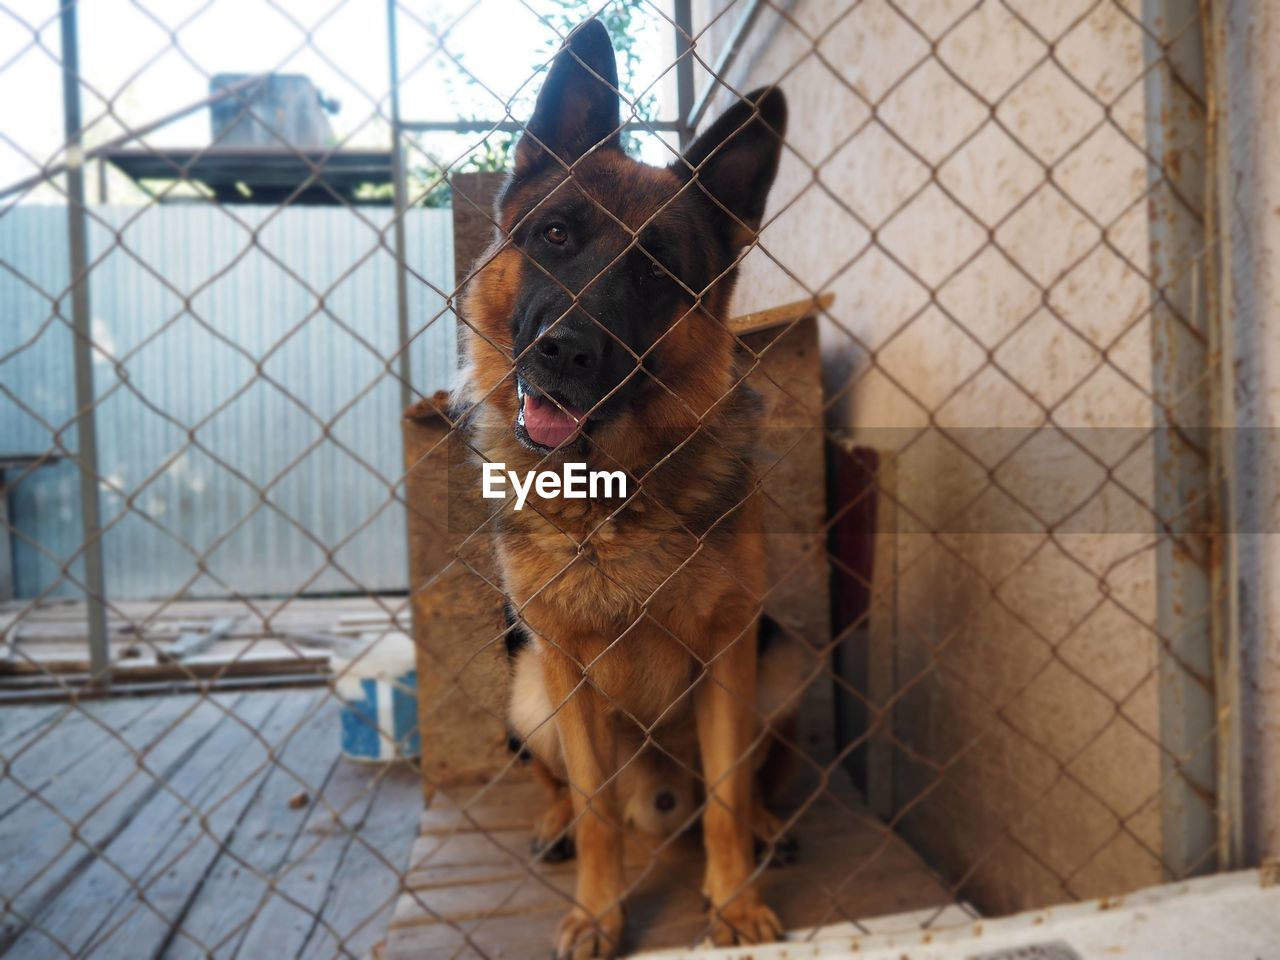 pet, mammal, domestic animals, animal themes, animal, one animal, dog, canine, animal shelter, german shepherd, fence, security, no people, day, carnivore, protection, architecture, looking, portrait, facial expression, outdoors, built structure, sticking out tongue